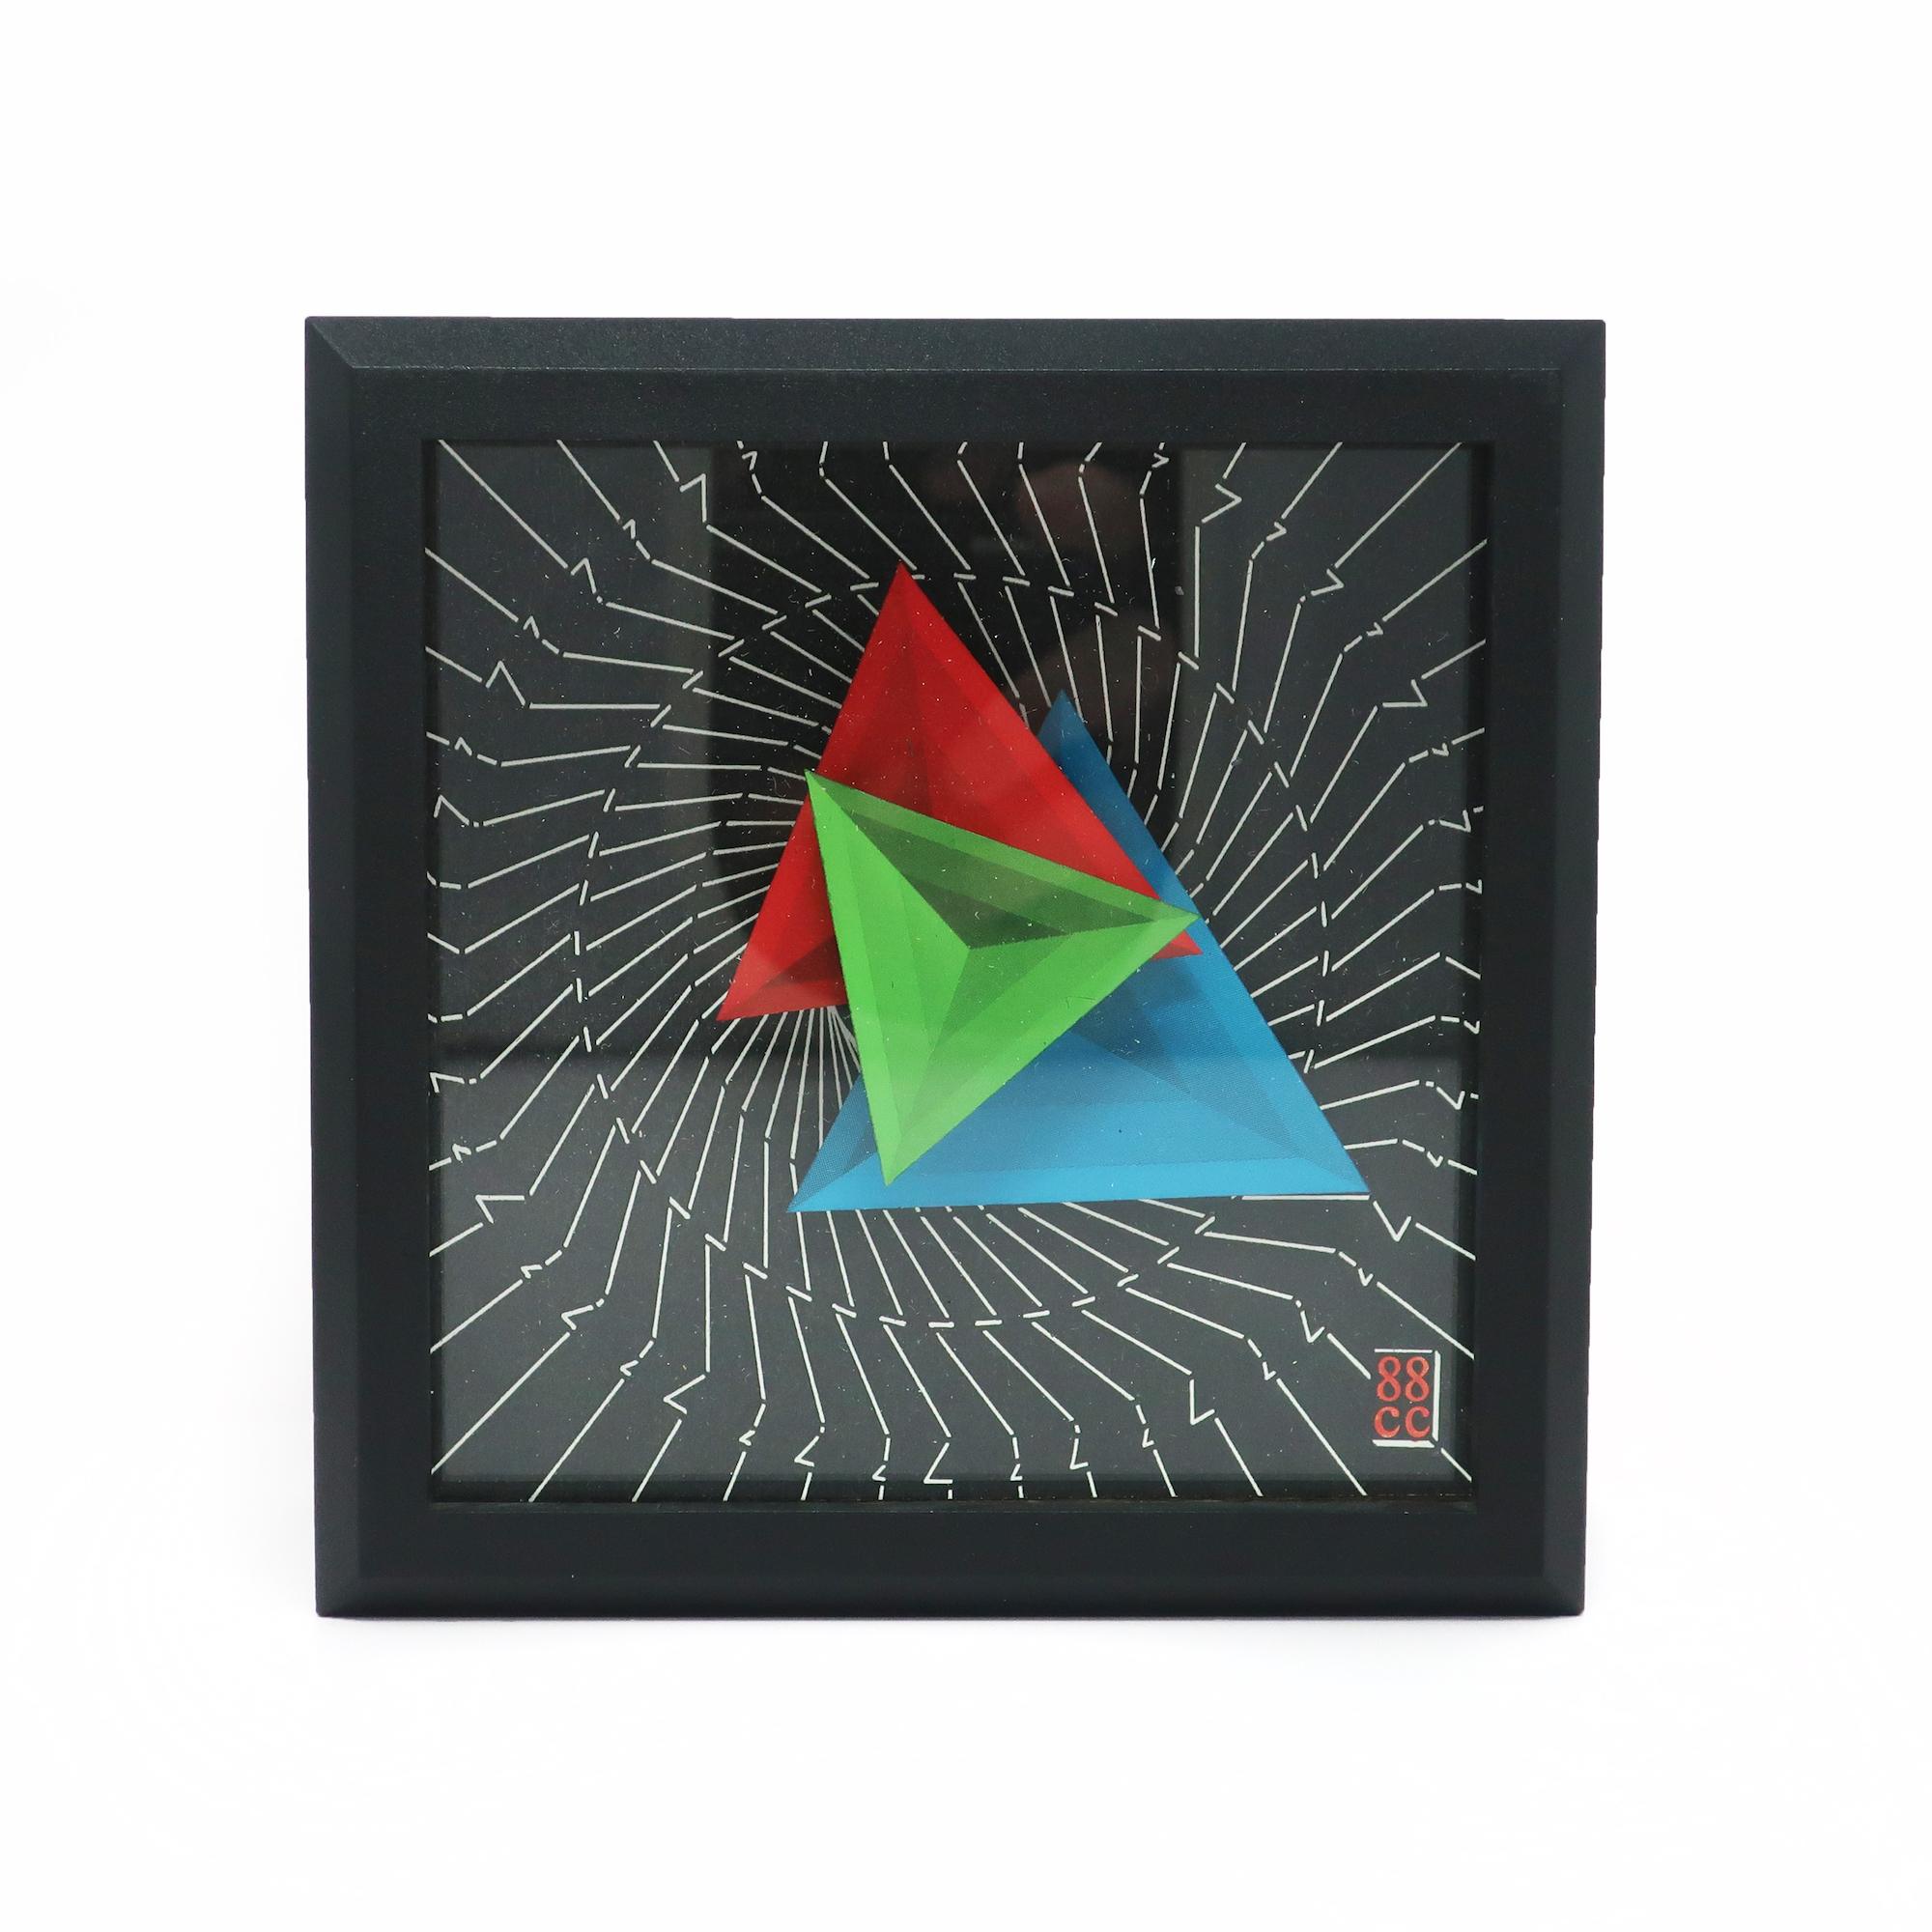 A rare desk clock designed by Douglas Chalk for Clever Clocks. A square plastic case, mesmerizing black and white psychedelic background and multicolor triangular hands.

In good vintage condition and in original box.

Measures: 6